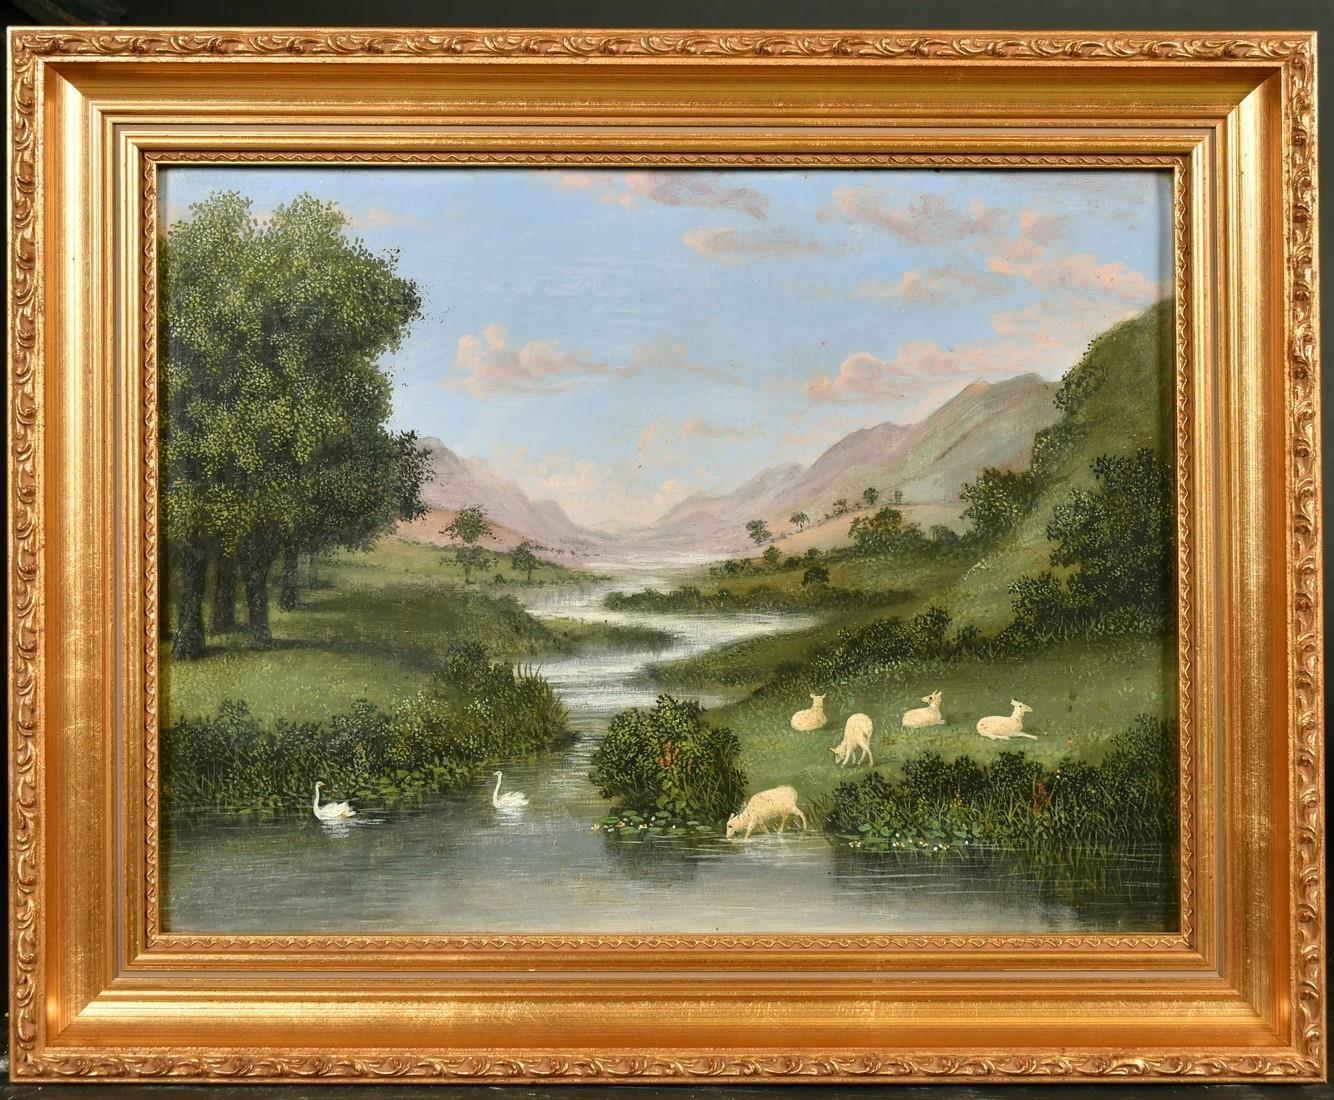 19th Century Provincial School Oil Painting River Landscape with Sheep and Swans